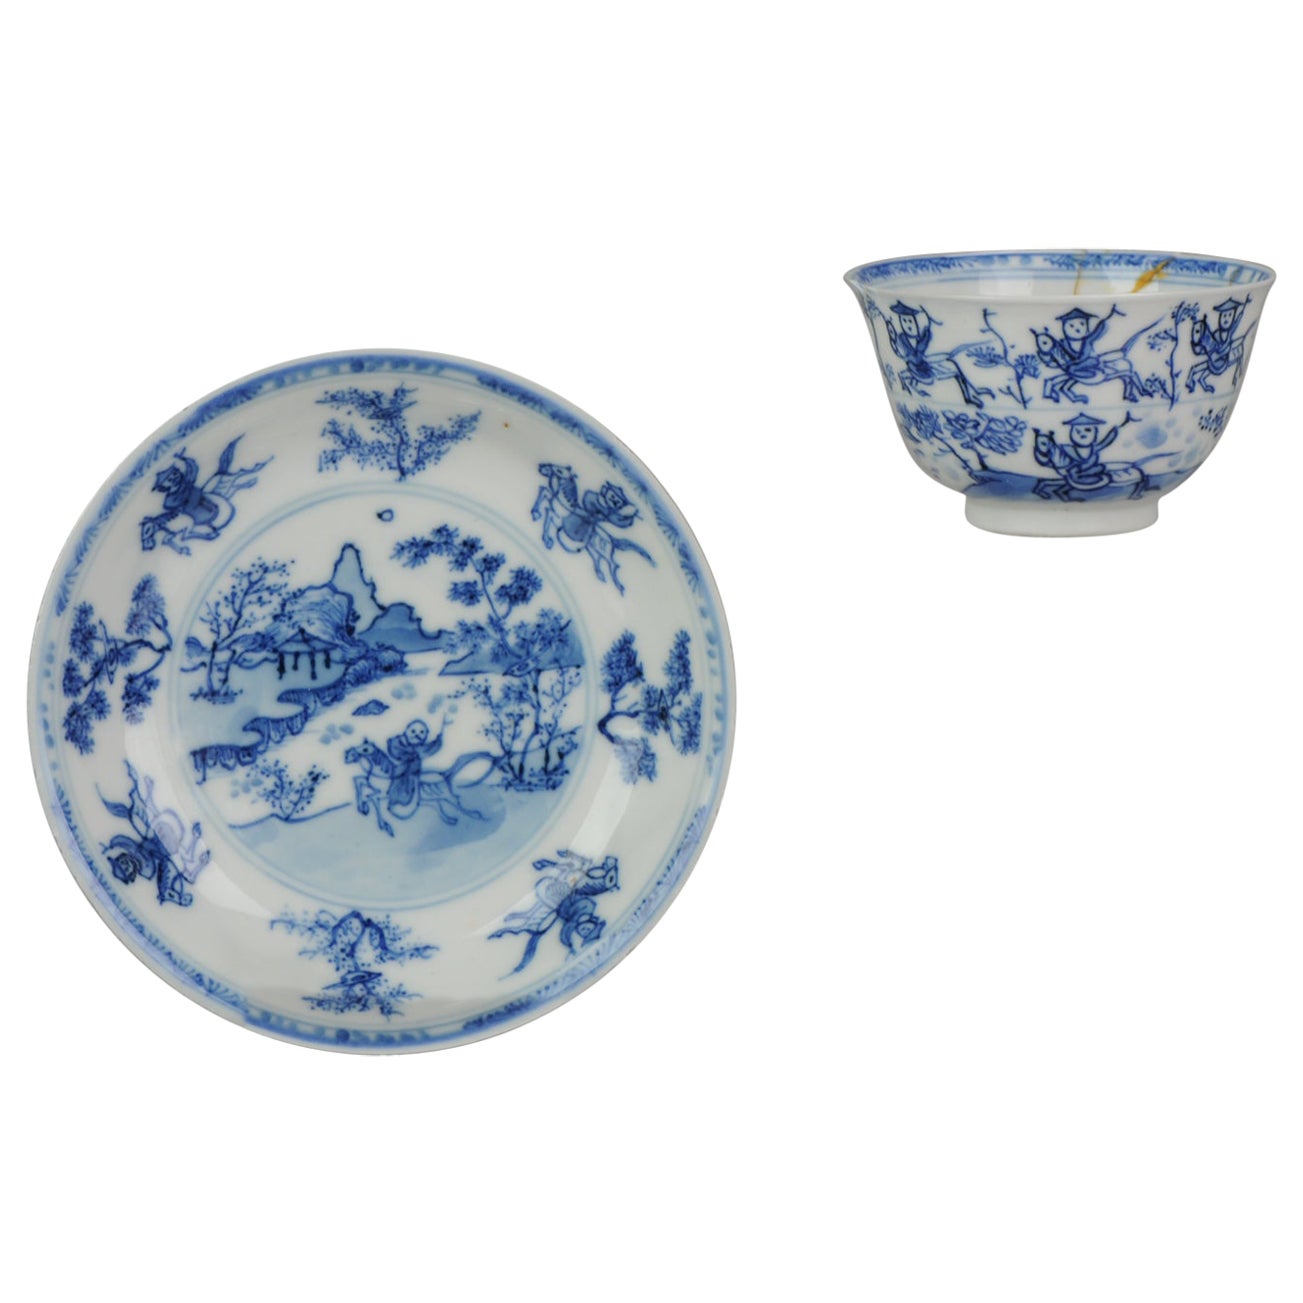 Ancienne assiette en porcelaine chinoise Kangxi Horse Master of the Rocks, vers 1680-1700